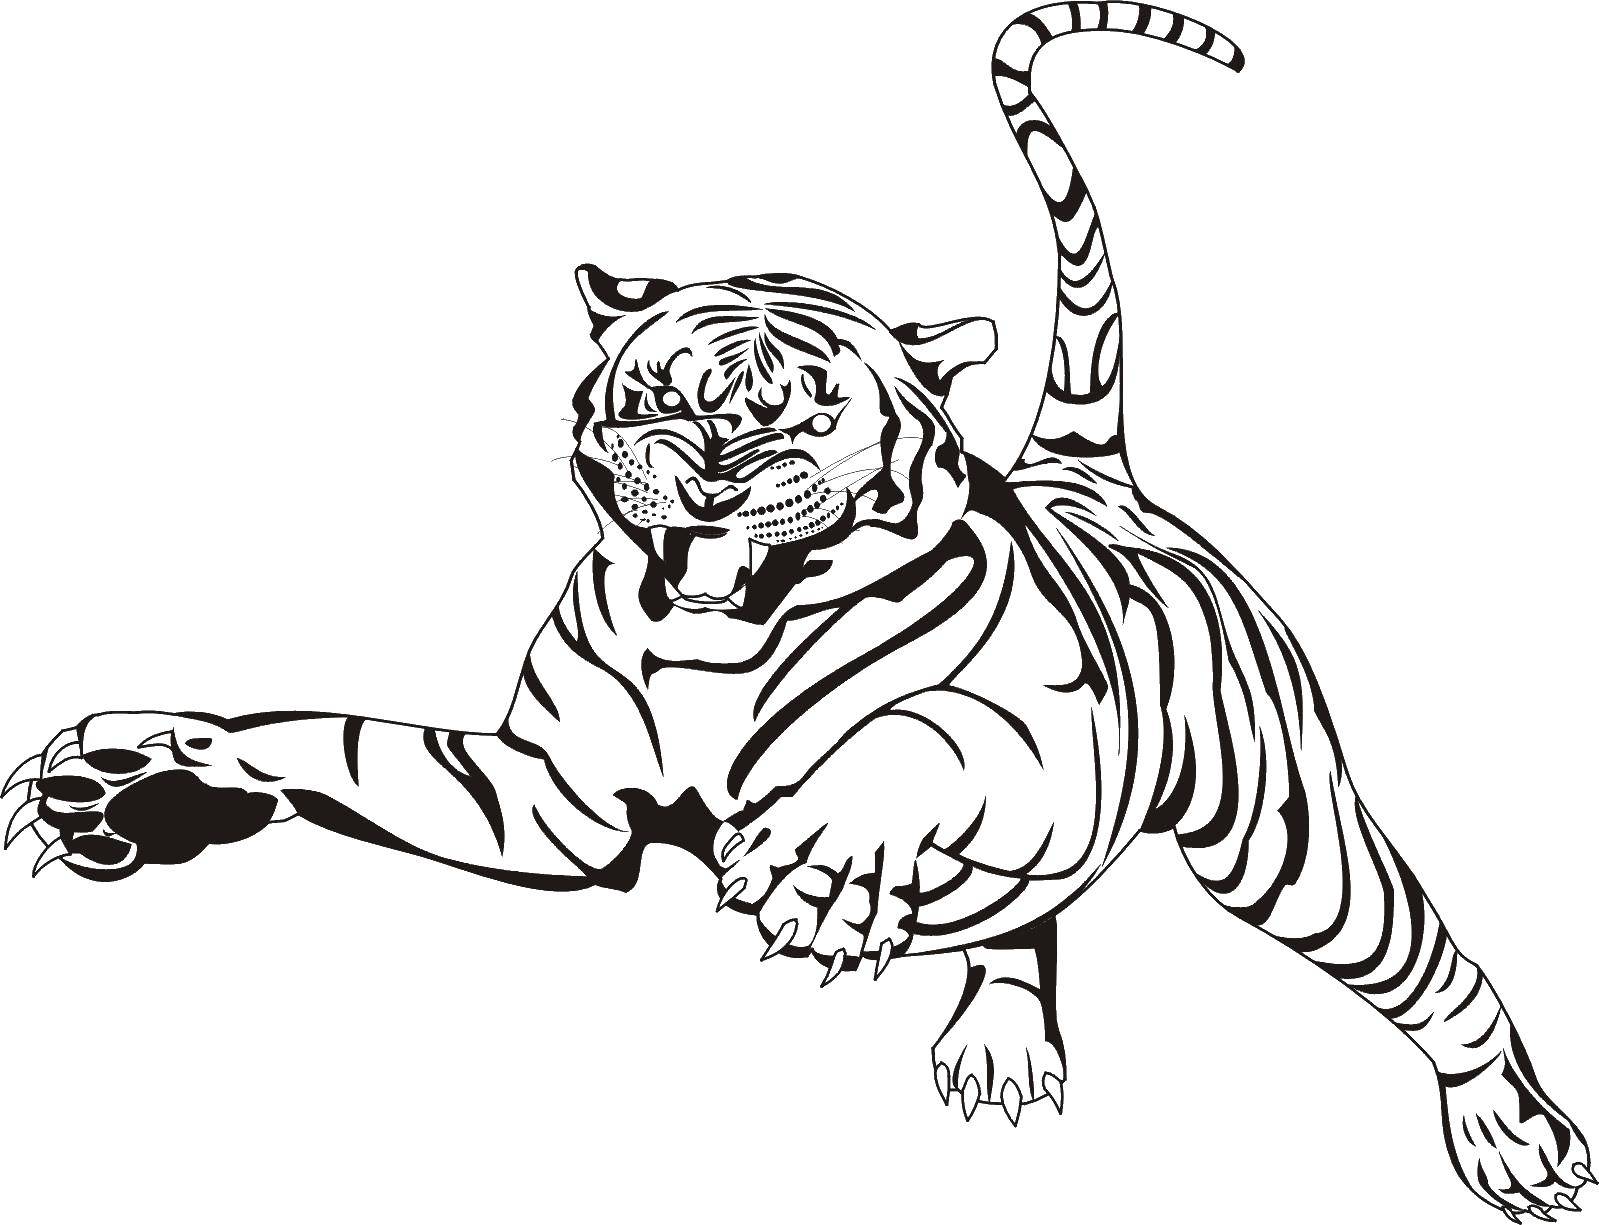 Coloring Tiger. Category Wild animals. Tags:  the tiger.